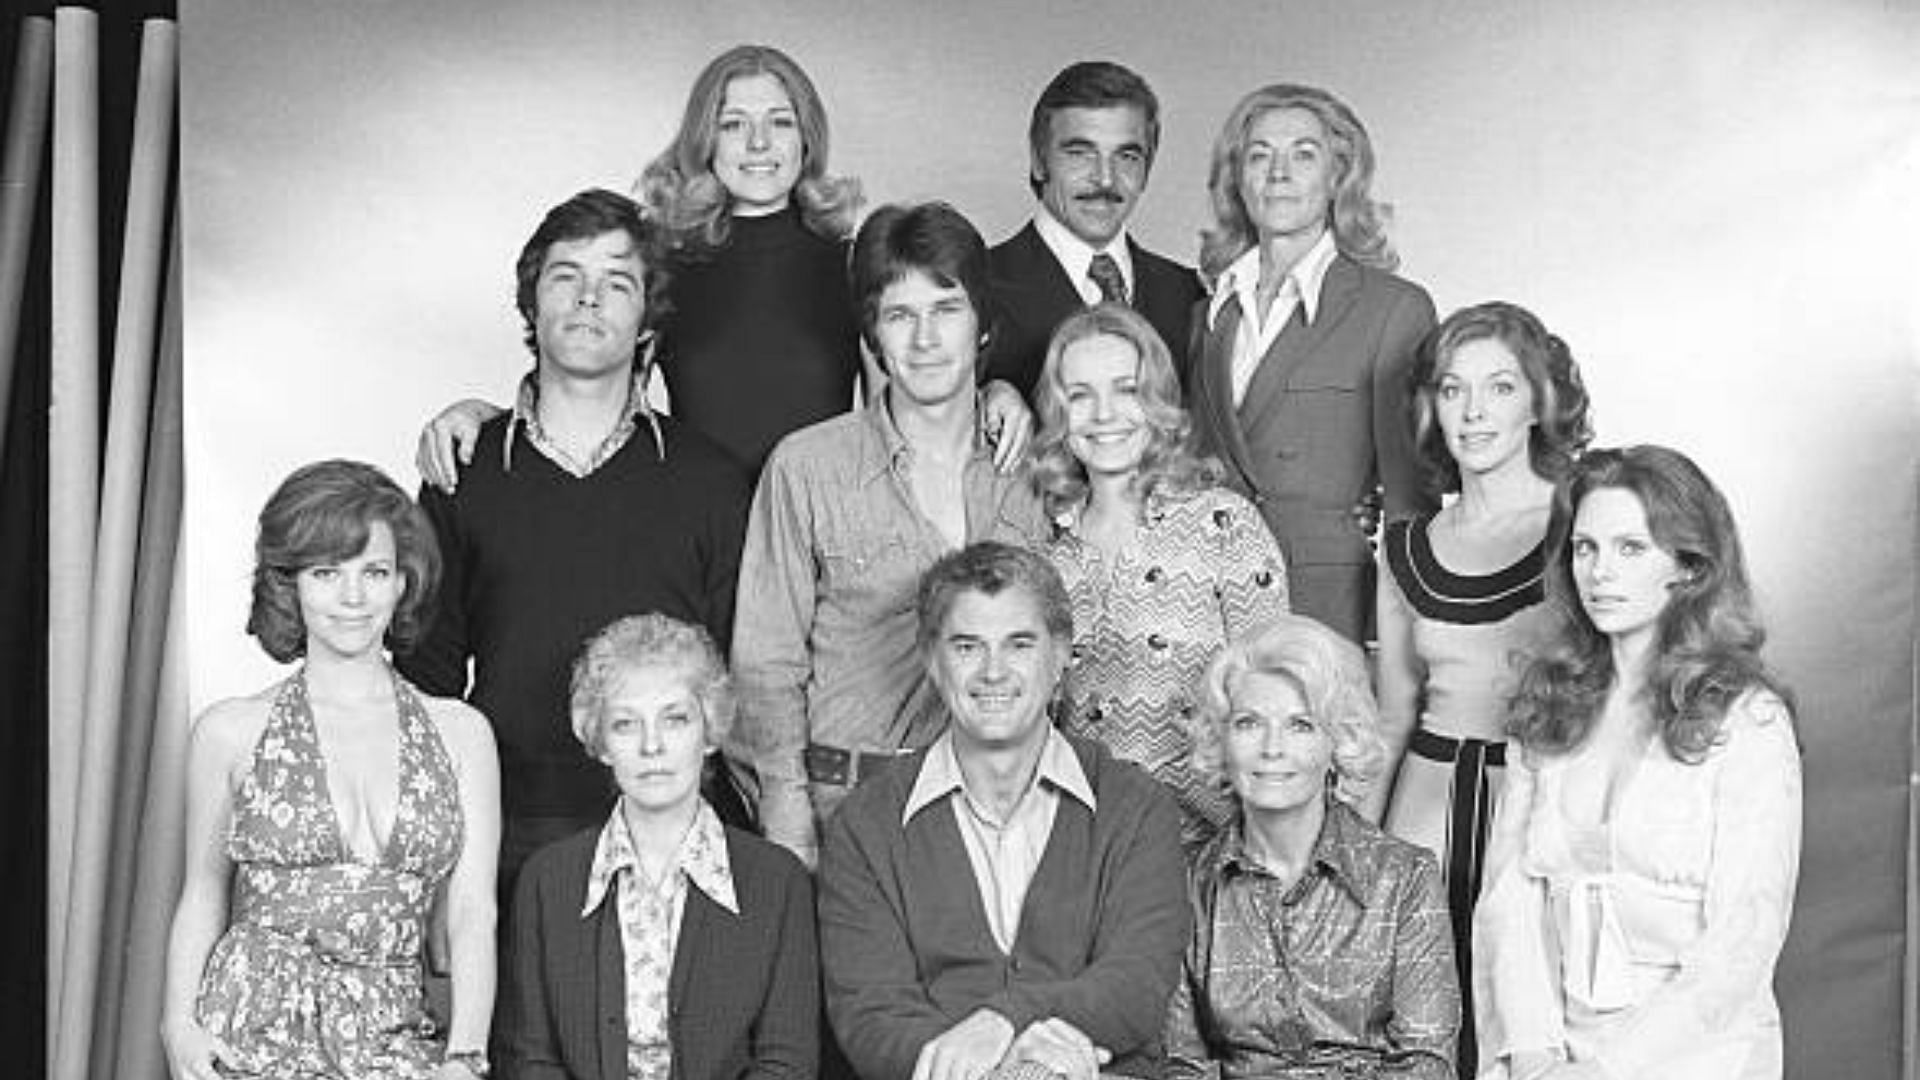 The Young and the Restless (Image by CBS via Getty Images)